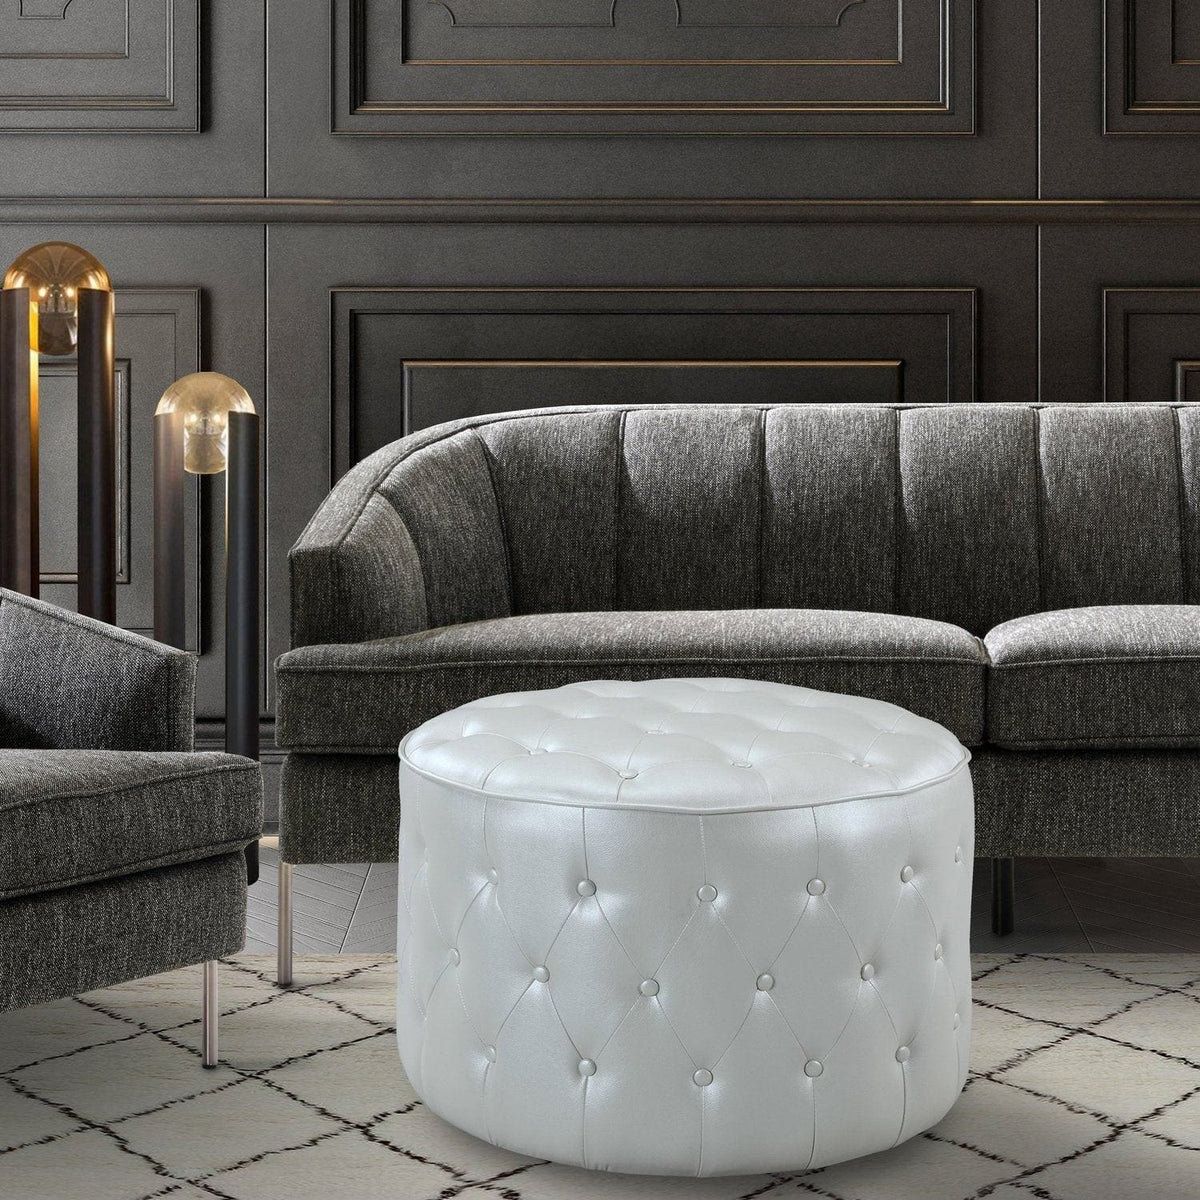 Iconic Home Marley Tufted Faux Leather Round Ottoman Pouf Beige